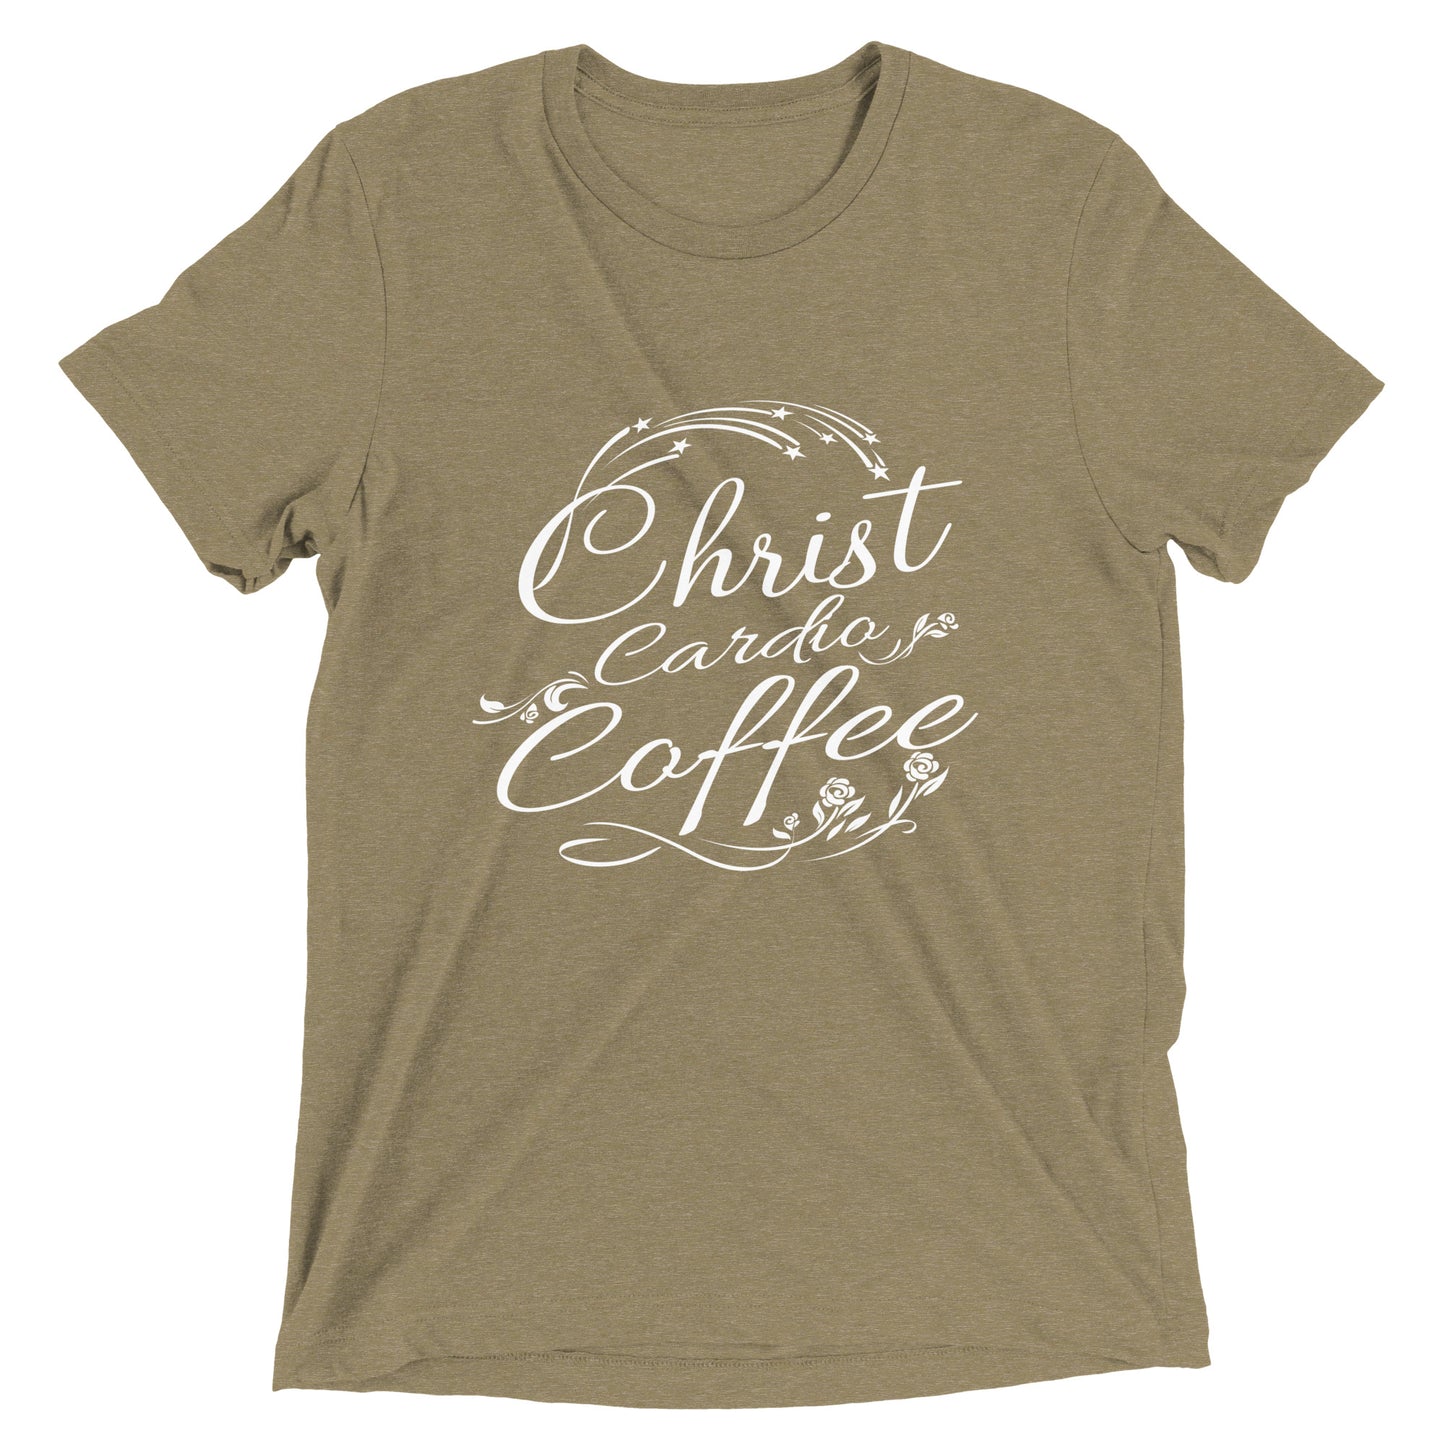 Christ Coffee Cardio - Short sleeve t-shirt - View All Colors